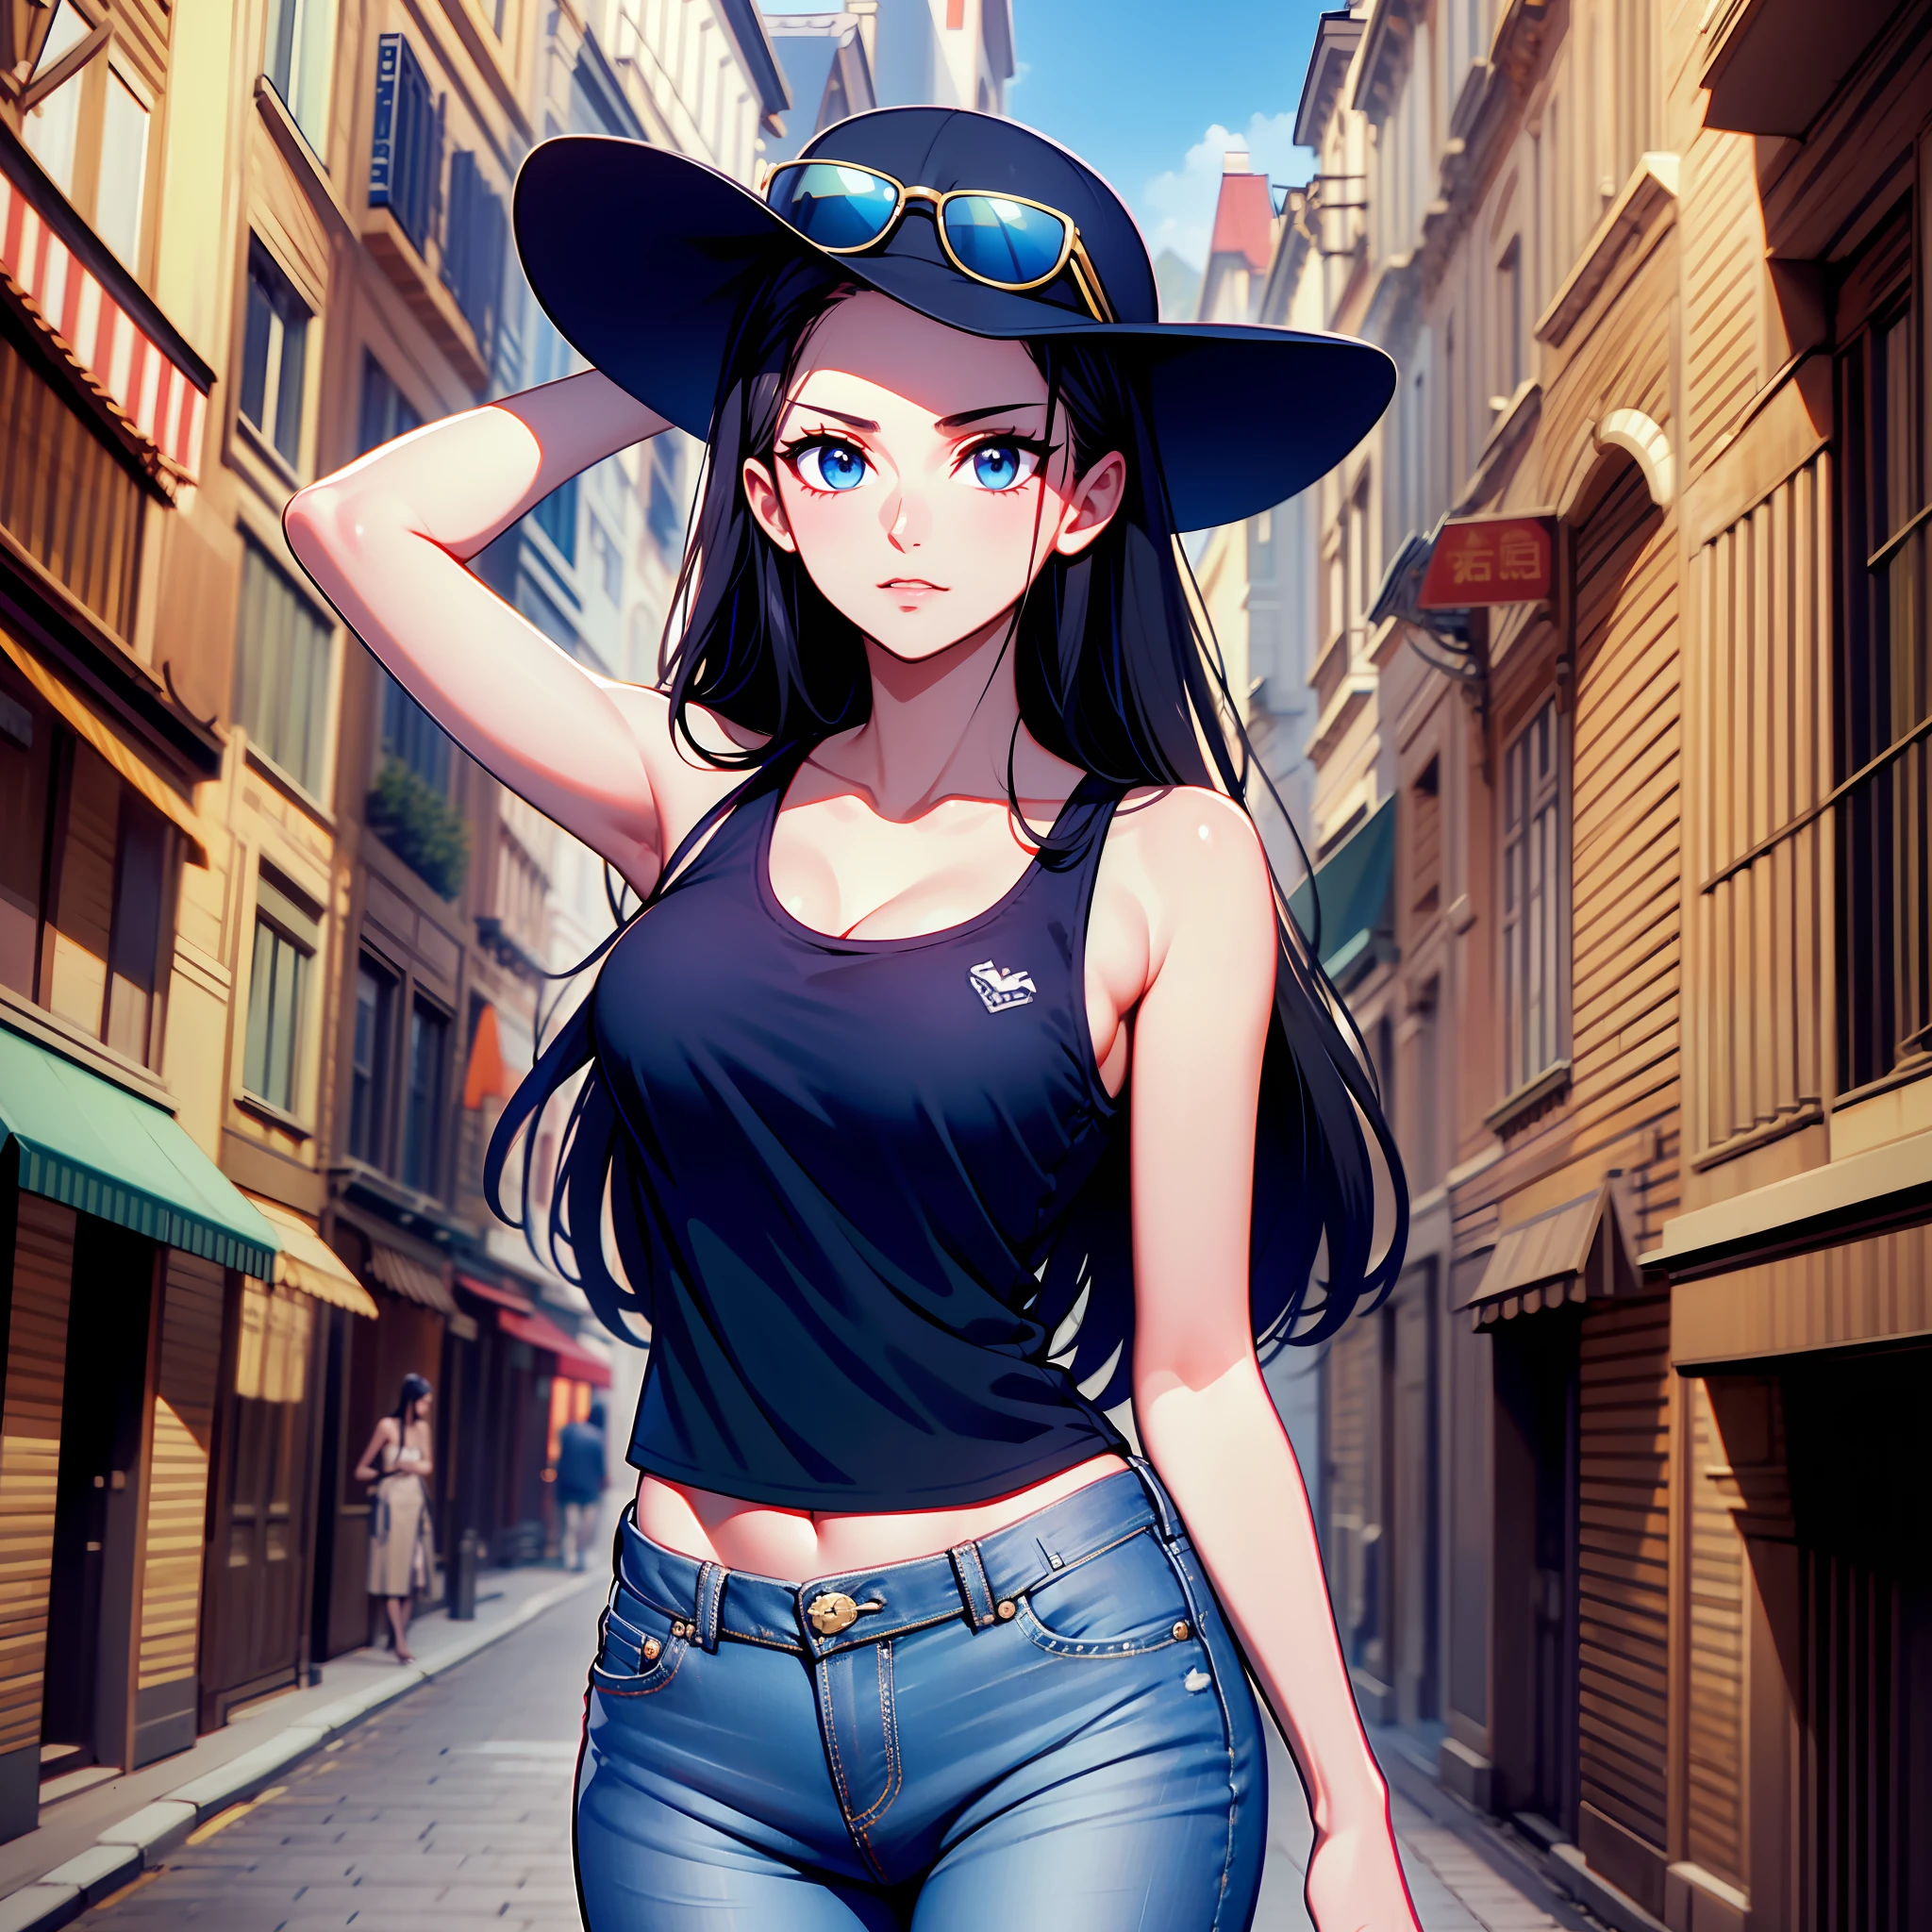 top-quality,​masterpiece,Masterpiece,8K,high-level image quality,High pixel count,detail portrayal,One woman,1girl,solo,Black hair,Long,straight haired,Dark blue eyes,High nasal muscles,I can see my forehead.,180 cm height,Slender body line,thin hip,,cowboy  shot,Standing figure,Medieval cityscape,Navy blue tank top T-shirt,jeans,Wear sunglasses on your head,full bodyesbian,Walking,Bullish look